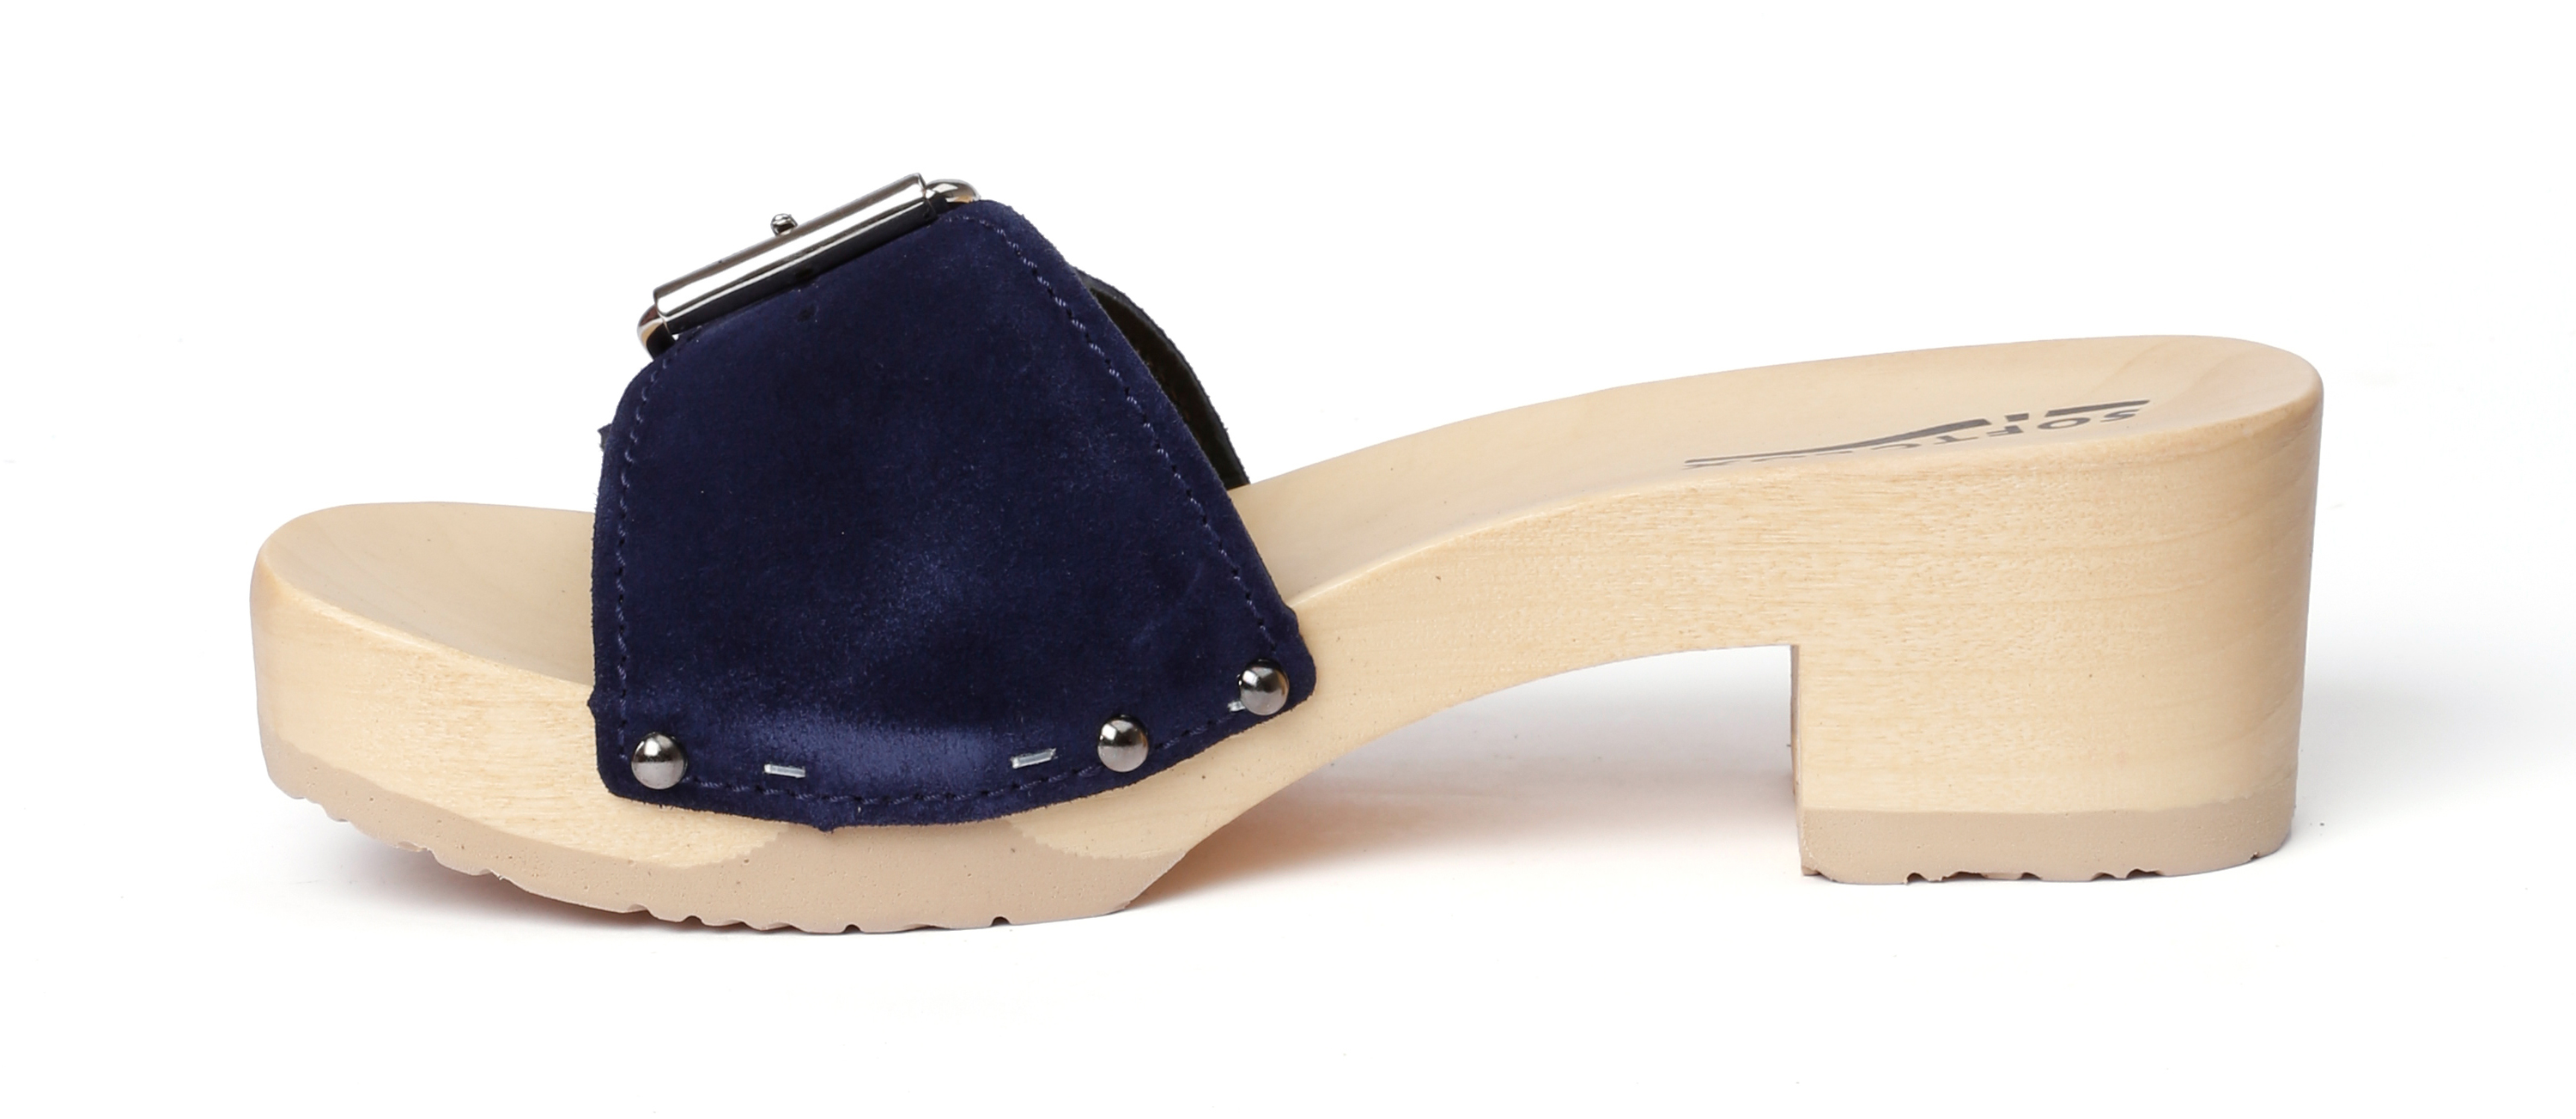 Shoe mule, made from poplar wood with smooth suede  in color navy by Softclox